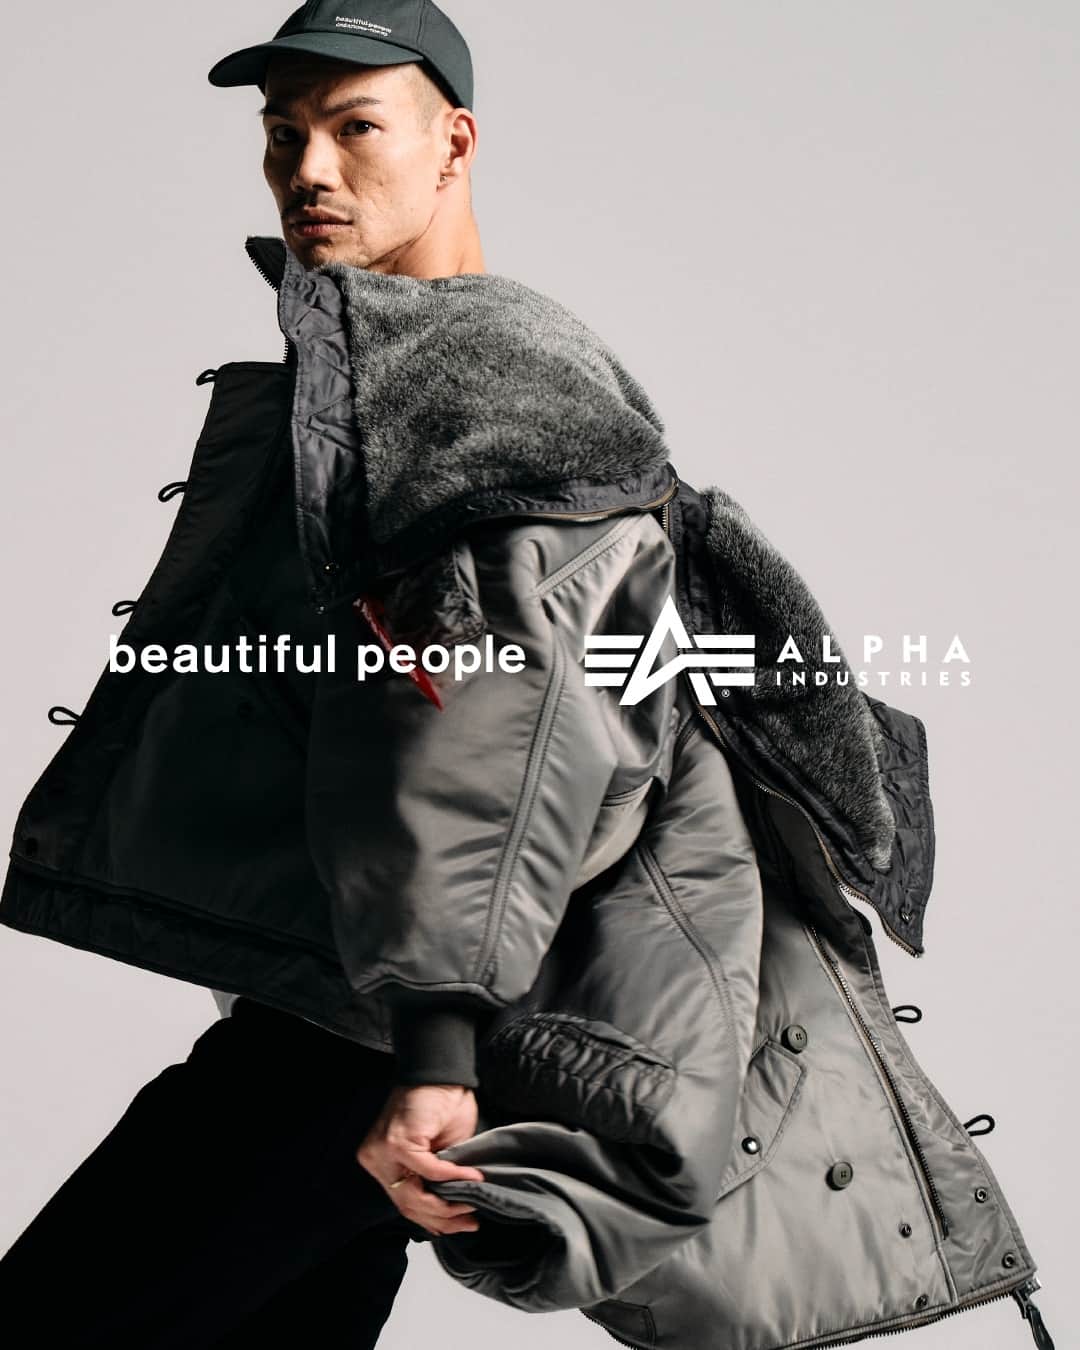 ビューティフルピープルさんのインスタグラム写真 - (ビューティフルピープルInstagram)「#DOUBLEEND beautiful people x ALPHA INDUSTRIES @alphaindustries @alpha_industries_japan⁠ 4-WAY flight jacket⁠ ⁠ ◻︎ ⁠beautiful people x ALPHA INDUSTRIES double-end nylon flight jacket⁠ color: ⁠gray*navy⁠ size: ⁠34/36/38/40/42⁠ material: ⁠nylon 100%⁠ ALPHA INDUSTRIESとのコラボレーションブルゾン。上下逆さまに着用することで、N-2BがMA-1へと変化します。さらにリバーシブルで着用することで、オリジナルのネイビーカラーに。⁠ 確かな実績を誇るALPHA縫製工場にて作成された本格仕様です。ダブルエンドならではのボリューム感とデザインのありそうでない1着に。⁠ ⁠ ⁠ ALPHA INDUSTRIES and beautiful people have collaborated for the first time to launch a new 4-way bomber jacket with authentic military specifications.⁠ ⁠ Inspired by a test sample of a 1958 N-2B flight jacket, which was never released to the public, and ALPHA's signature MA-1 vintage flight army, this bomber jacket is a surprising 4-way specification that can be worn inside-out and upside-down.⁠ ⁠ ___⁠ ⁠ ⁠ ■Online store⁠ www.beautiful-people.jp⁠ ⁠ ■Global Online store⁠ www.beautiful-people-creations-tokyo.com⁠ ⁠ ■ 青山店⁠⁠⁠⁠ 東京都港区南青山3-16-6⁠⁠⁠⁠ ⁠⁠⁠⁠ ■ 新宿伊勢丹店⁠ 伊勢丹新宿店本館2階⁠ TOKYOクローゼット/リ・スタイルTOKYO⁠⁠⁠⁠ ⁠⁠⁠⁠ ■ 渋谷PARCO店⁠ 渋谷パルコ2階⁠ ⁠ ■ ジェイアール名古屋タカシマヤ店⁠ ジェイアール名古屋タカシマヤ4階⁠ モード＆トレンド「スタイル＆エディット」⁠⁠⁠⁠ ⁠⁠⁠⁠ ■⁠阪急うめだ店⁠ 阪急うめだ本店3階　モード⁠⁠⁠⁠ ___⁠ ⁠ #beautifulpeople⁠⁠⁠ #ビューティフルピープル⁠⁠⁠ #SideC ⁠ #DOUBLEEND⁠ #ダブルエンド⁠ #collaboration⁠ #コラボ⁠ #MA1⁠ #N2B⁠ #reversible⁠ #4way⁠ #flightjacket⁠ #blouson⁠ #ALPHAINDUSTRIES⁠ #ALPHA」10月15日 7時00分 - beautifulpeople_officialsite